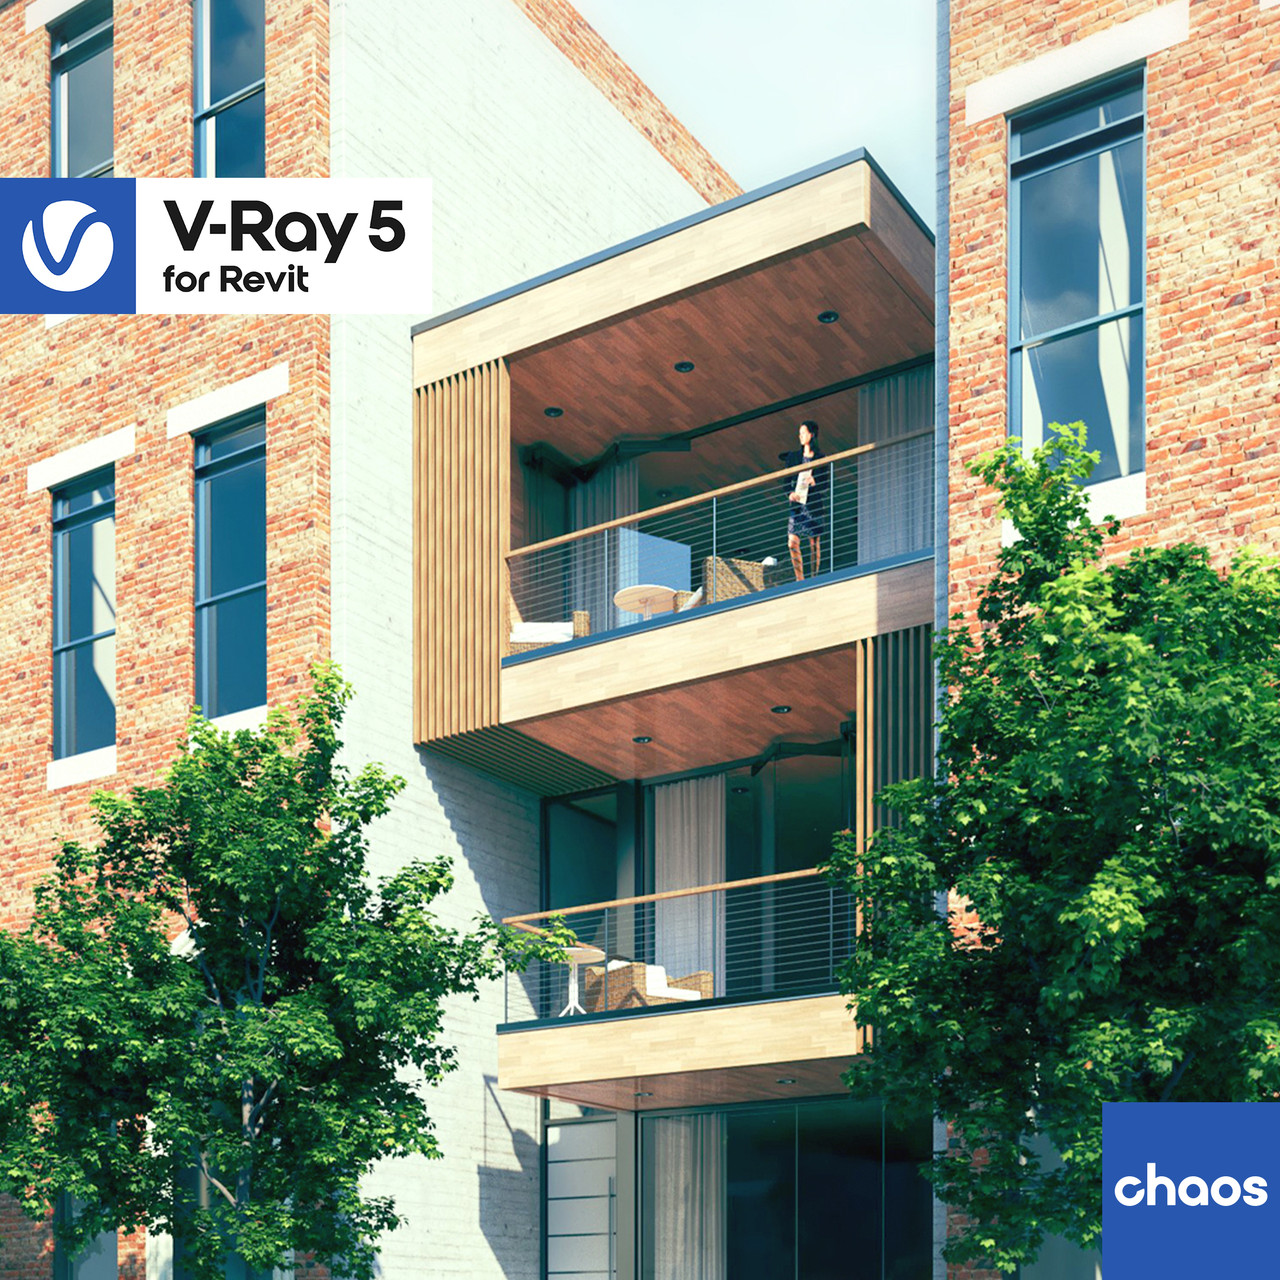 V-Ray 5 for Revit - Update 1 Out Now